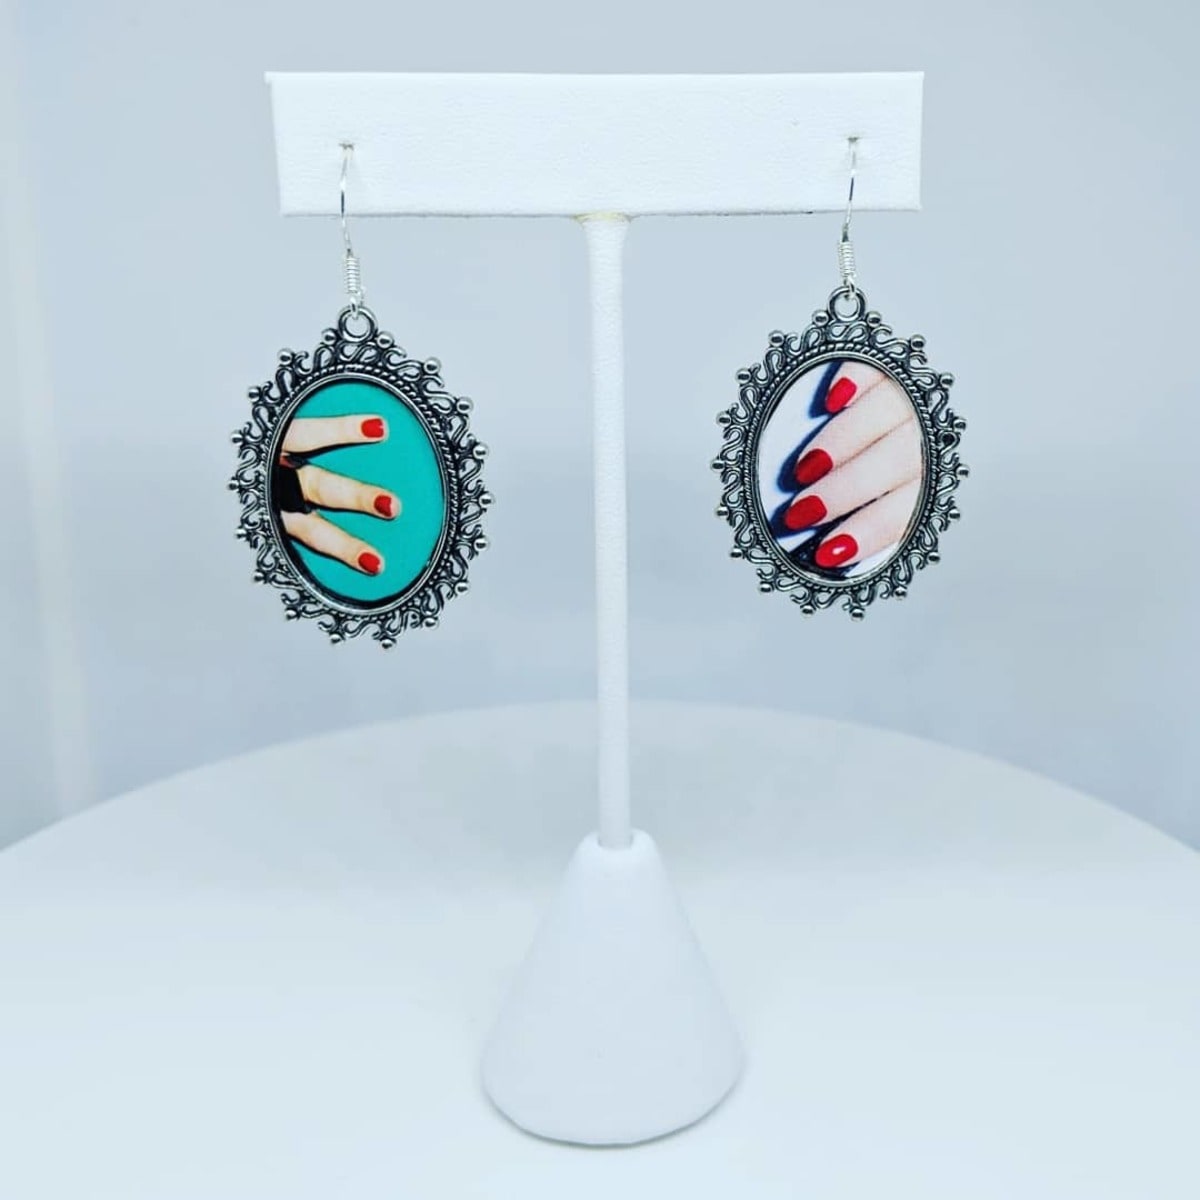 7 Digits (earrings) by Laura Collins 